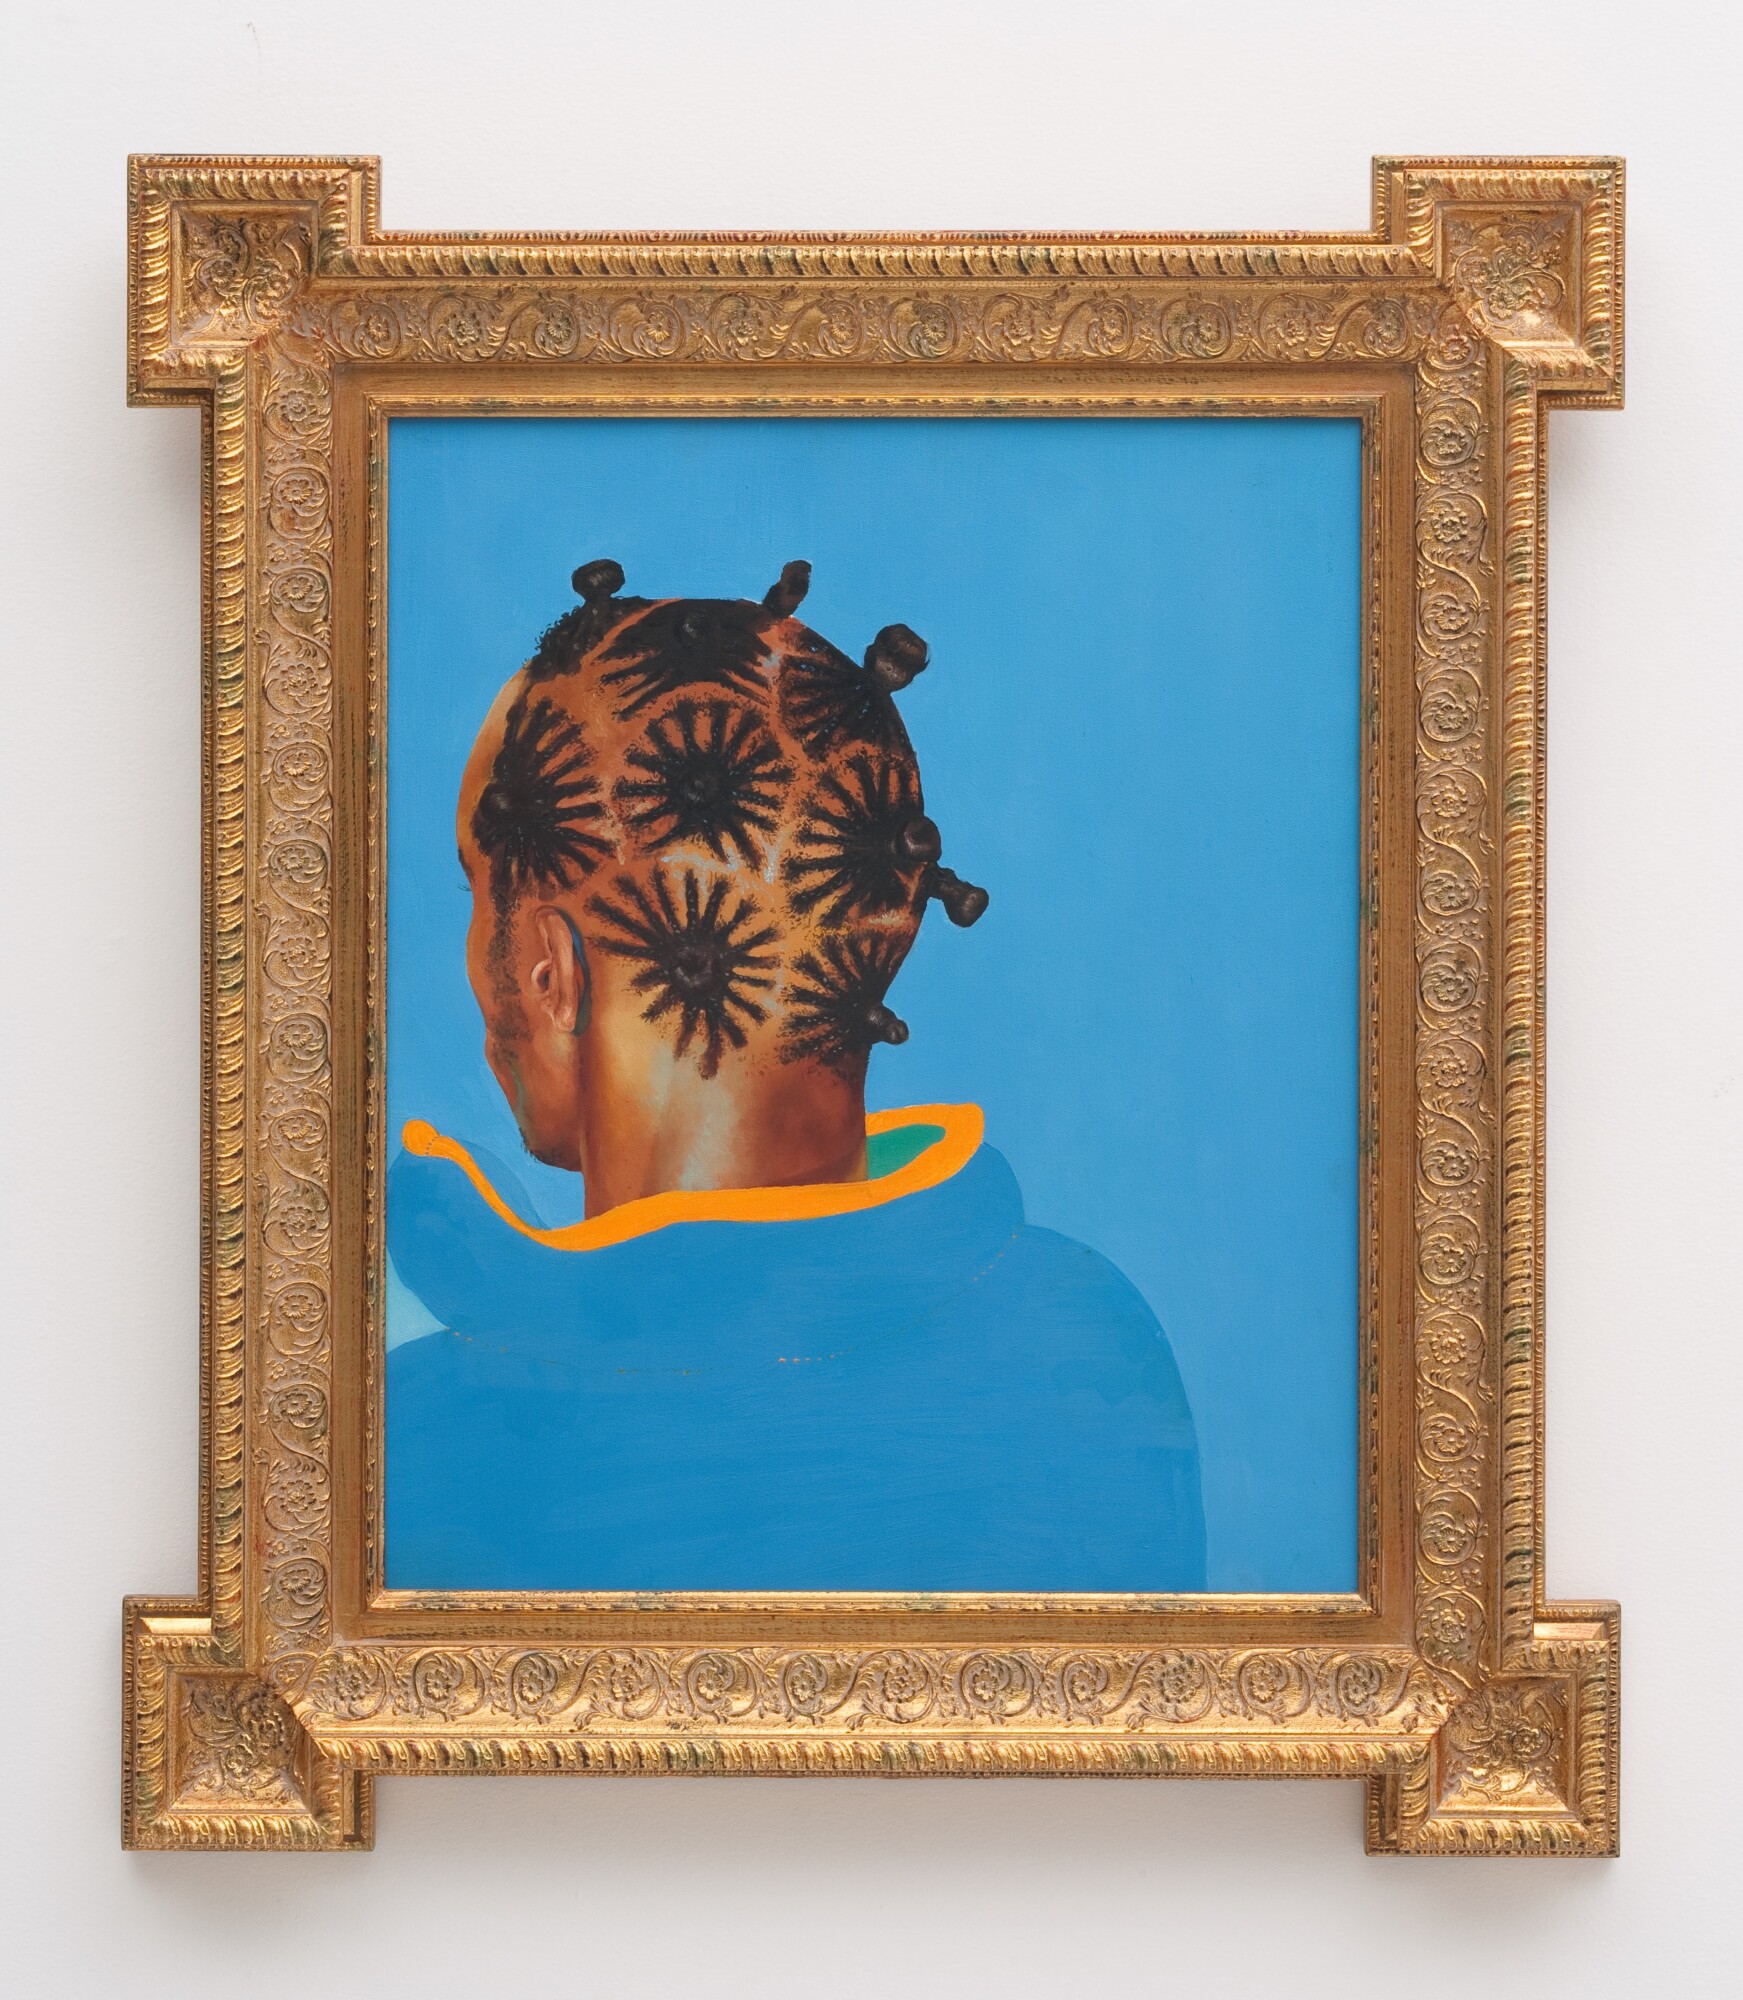 kehindewiley_a new republic_Mugshot_Profile_in_Blue